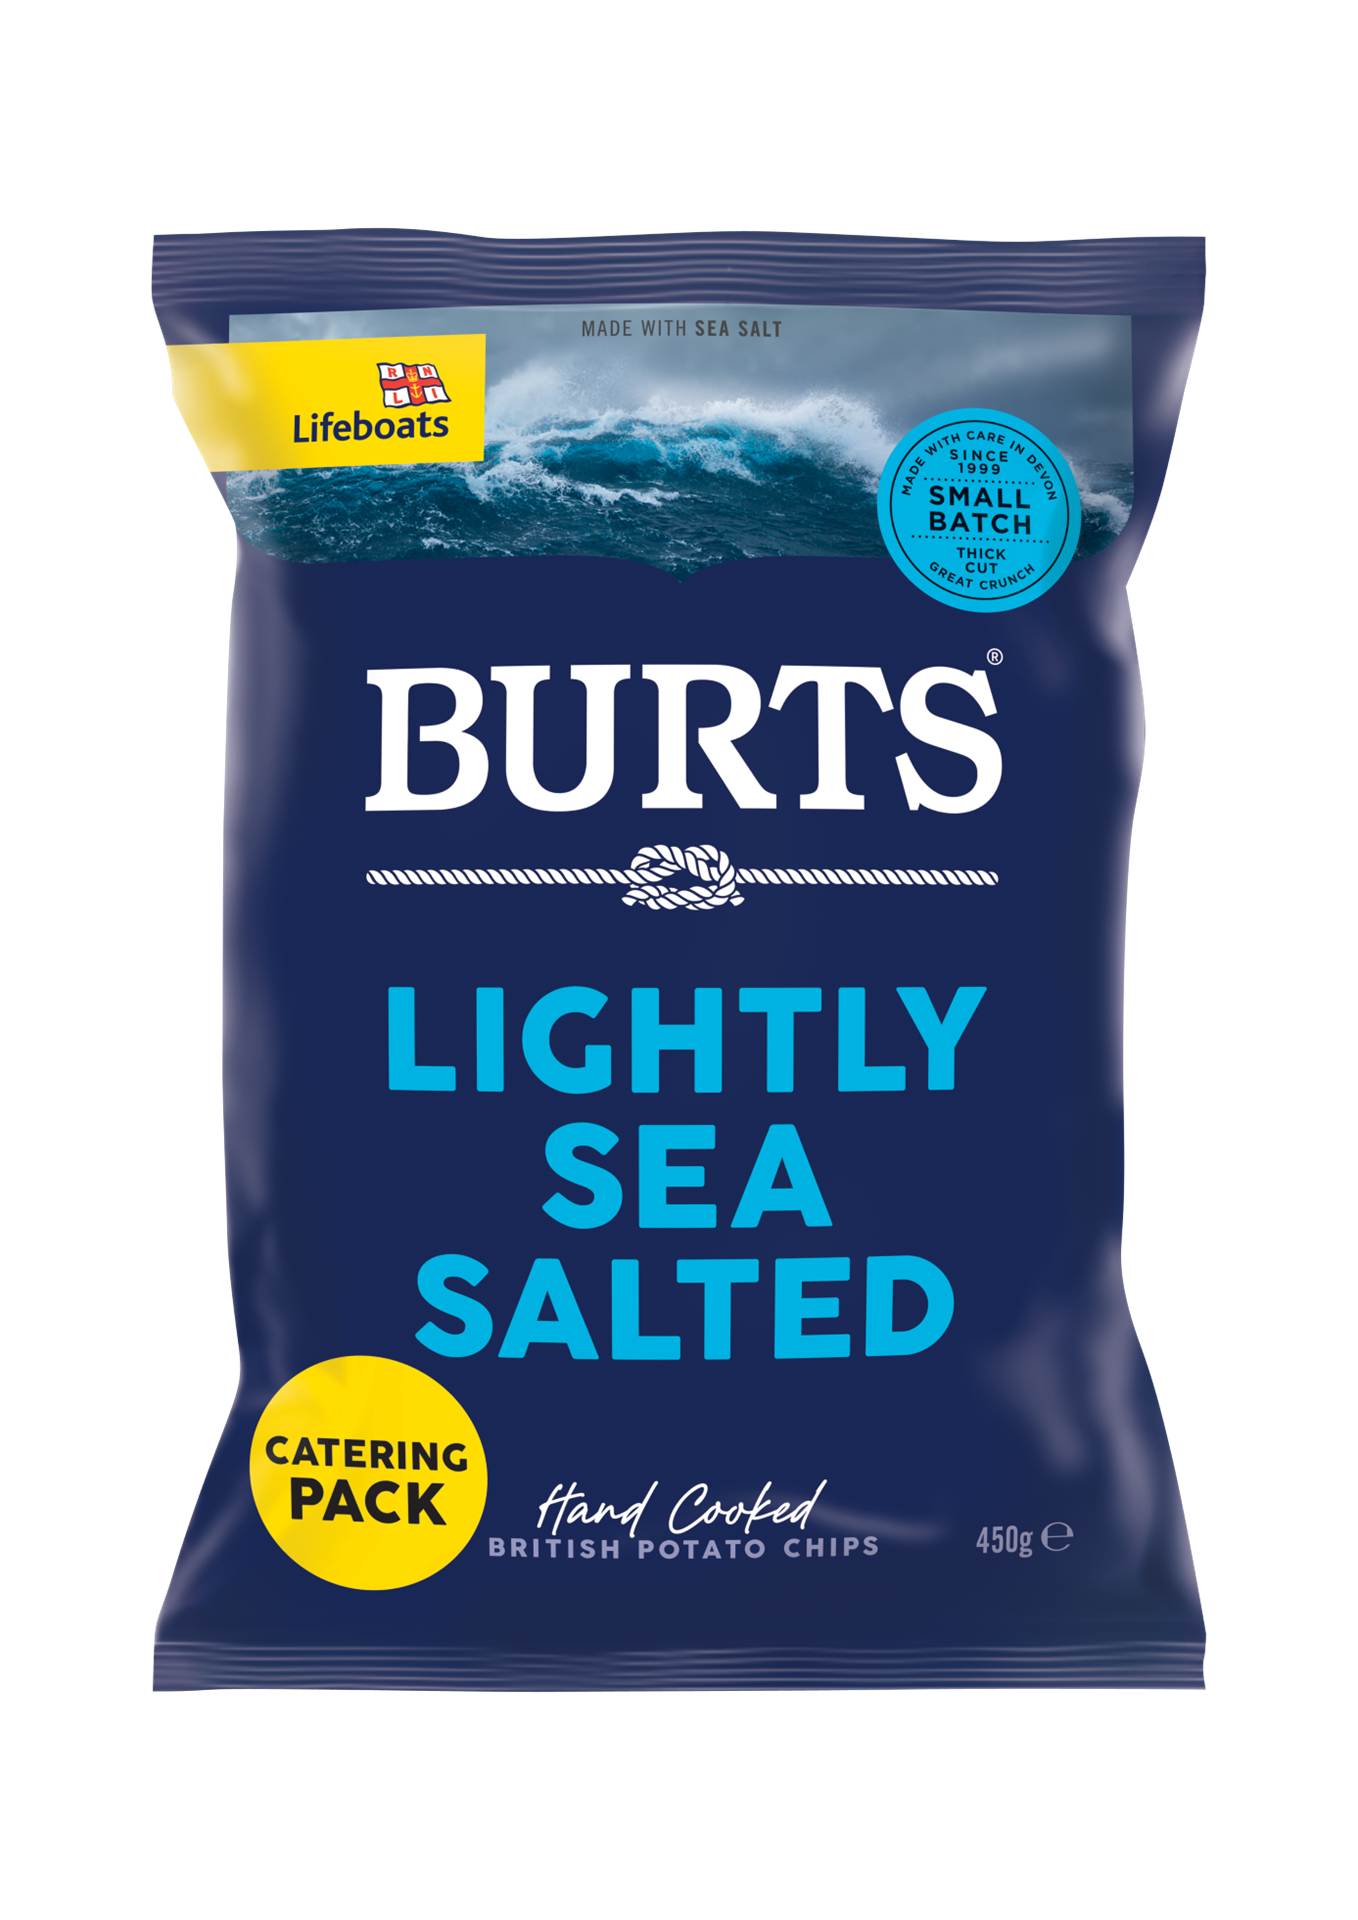 BURTS SALTED CATERING BAGS 450g x 4